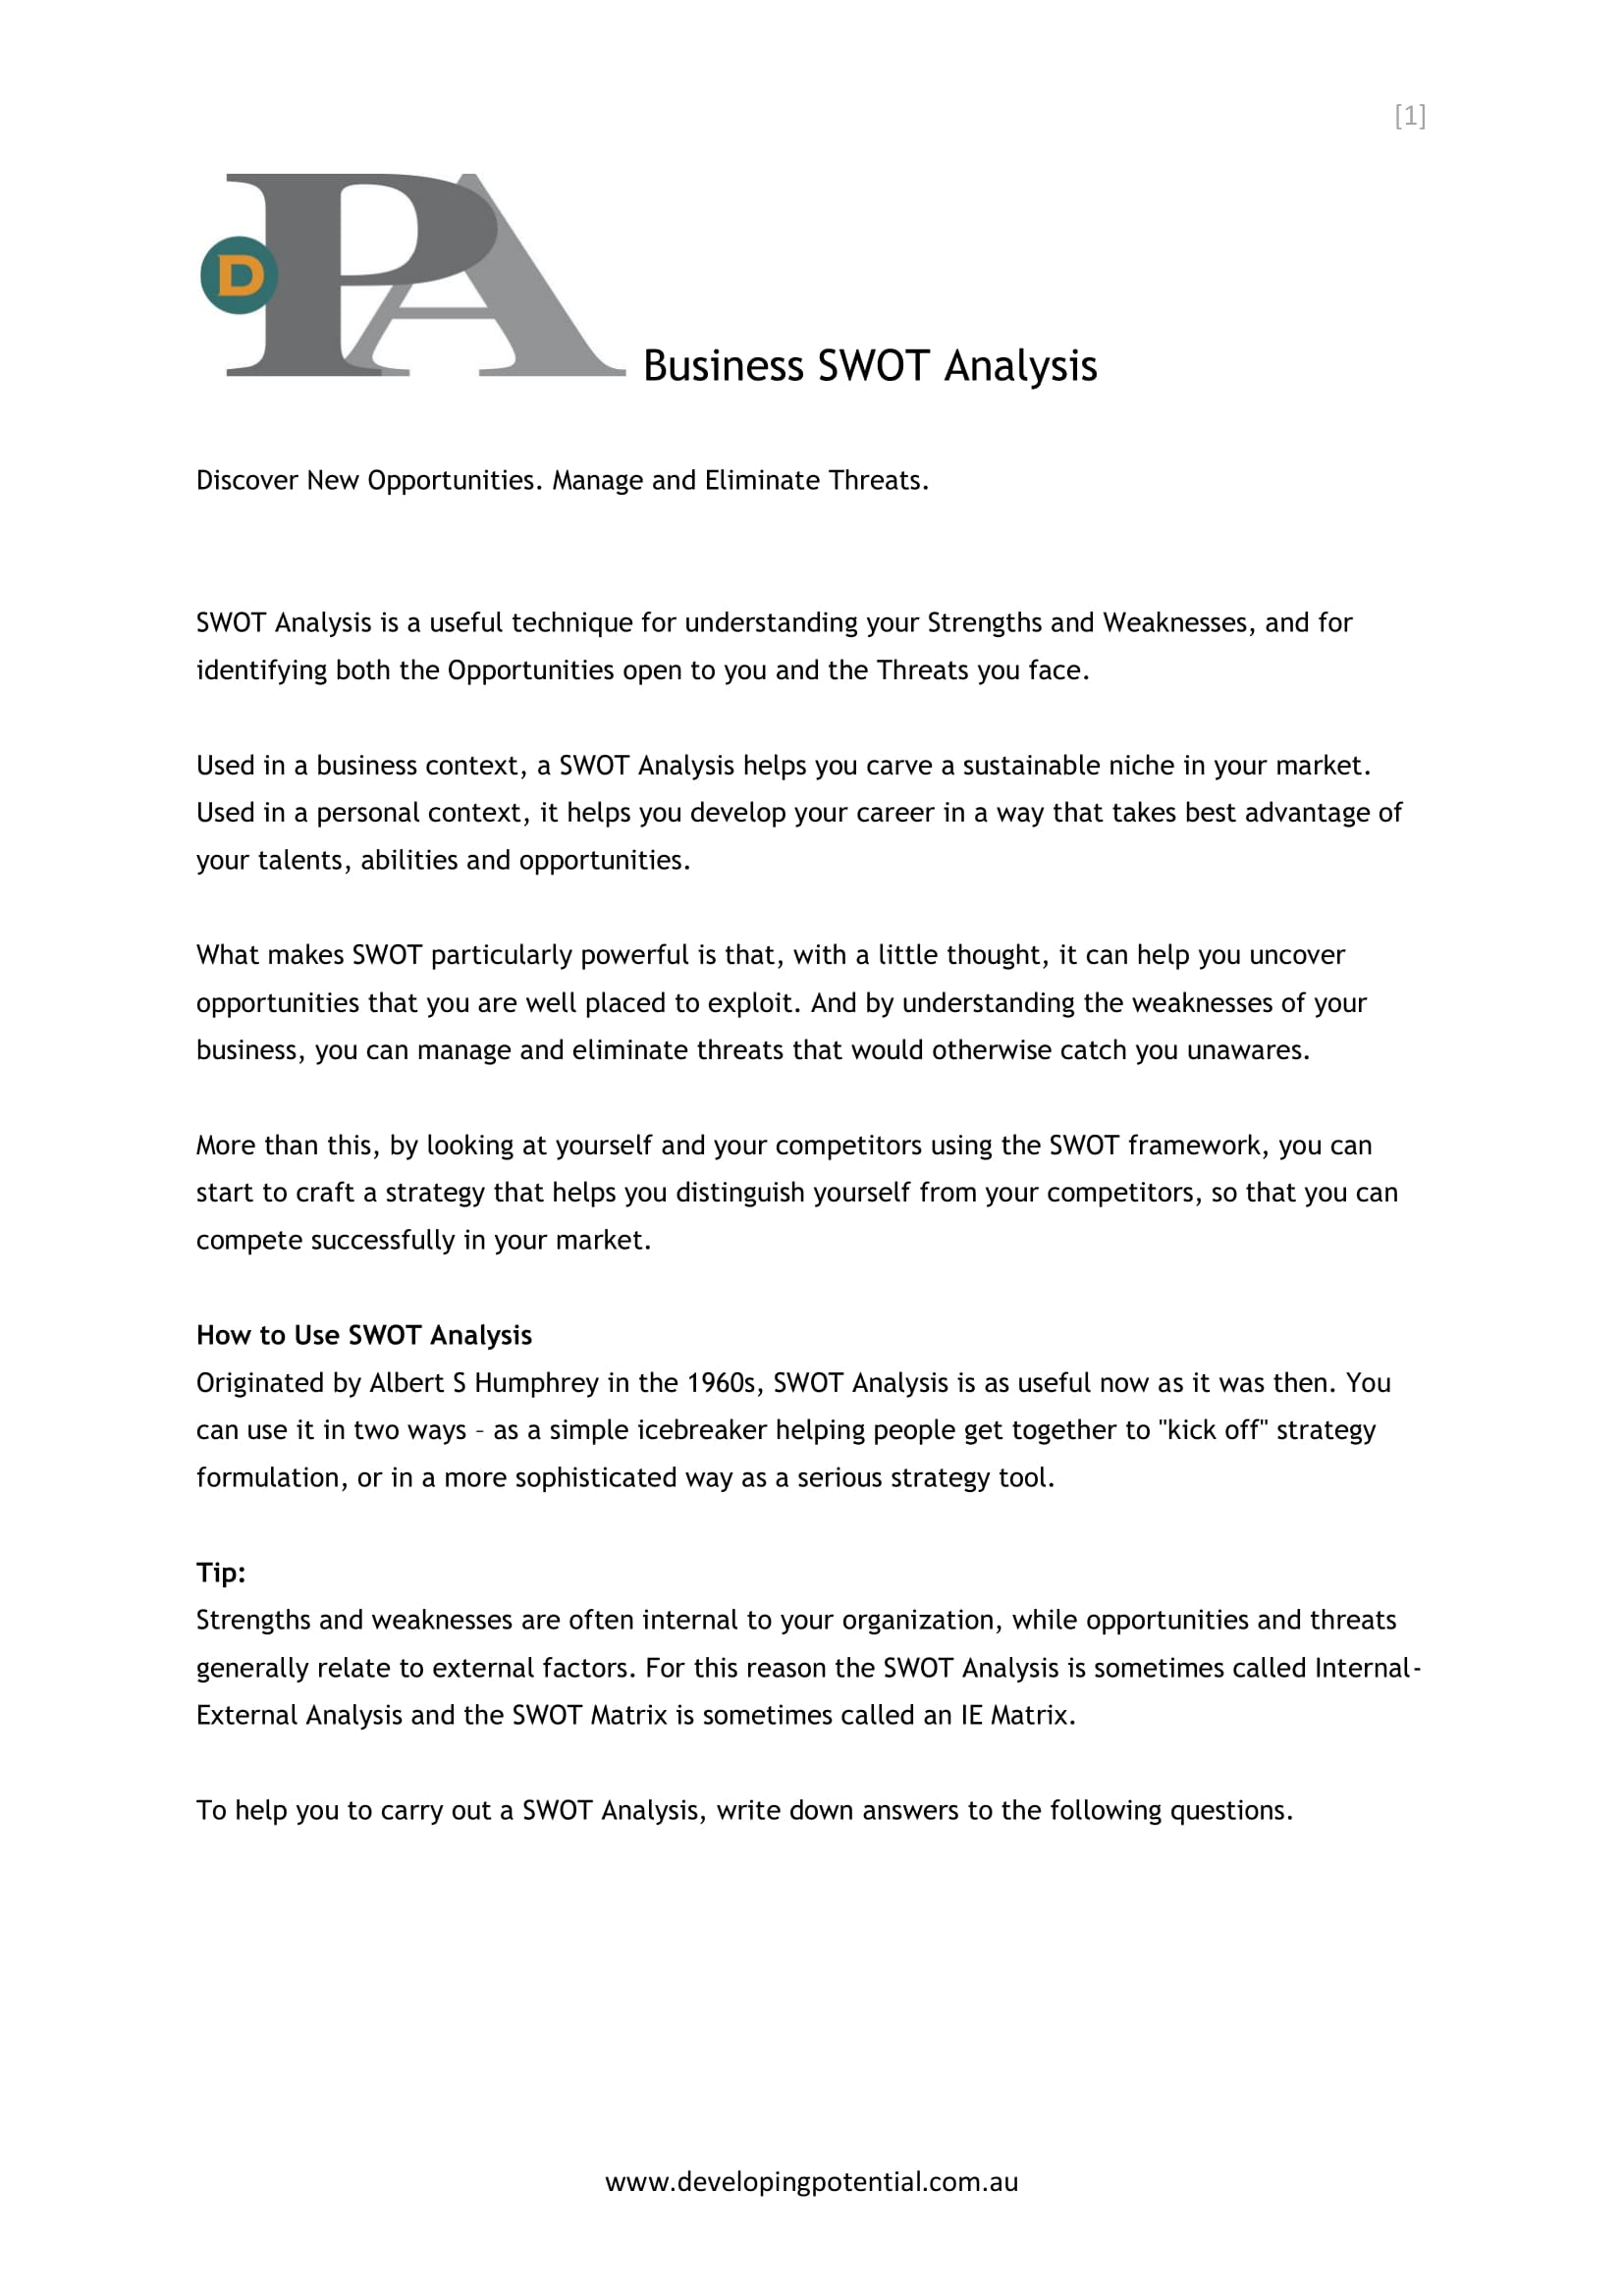 business-swot-analysis-example